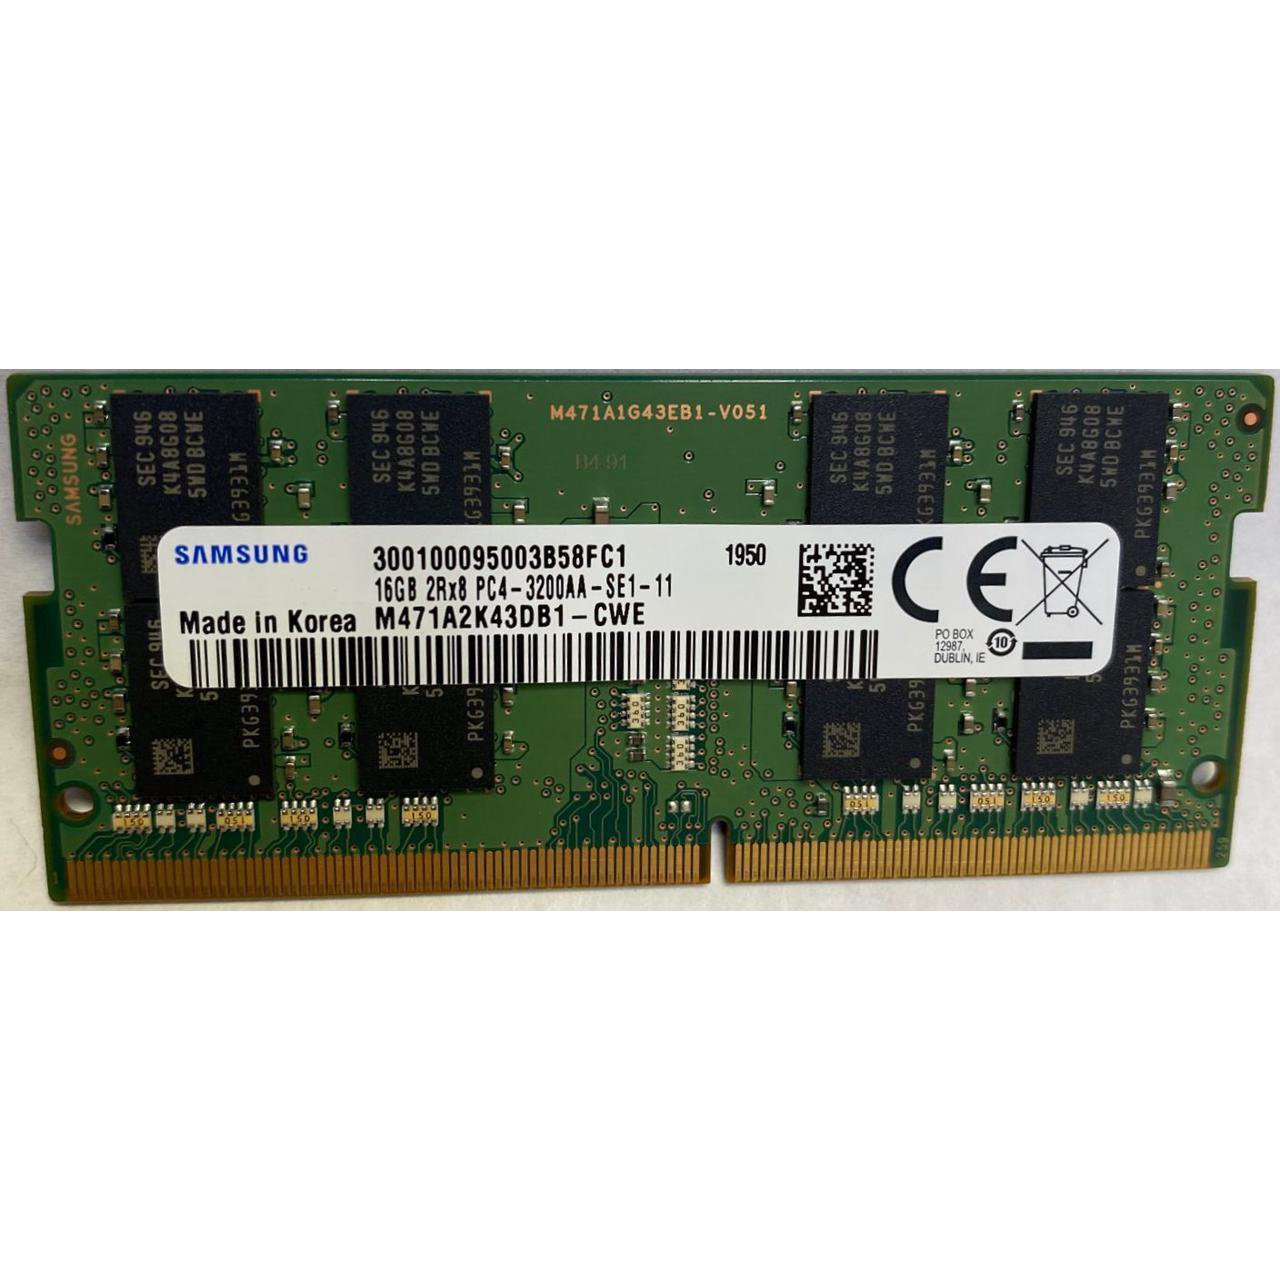 DDR4 4GB PC3200 SAMSUNG FOR NOTEBOOK, Laptop RAM